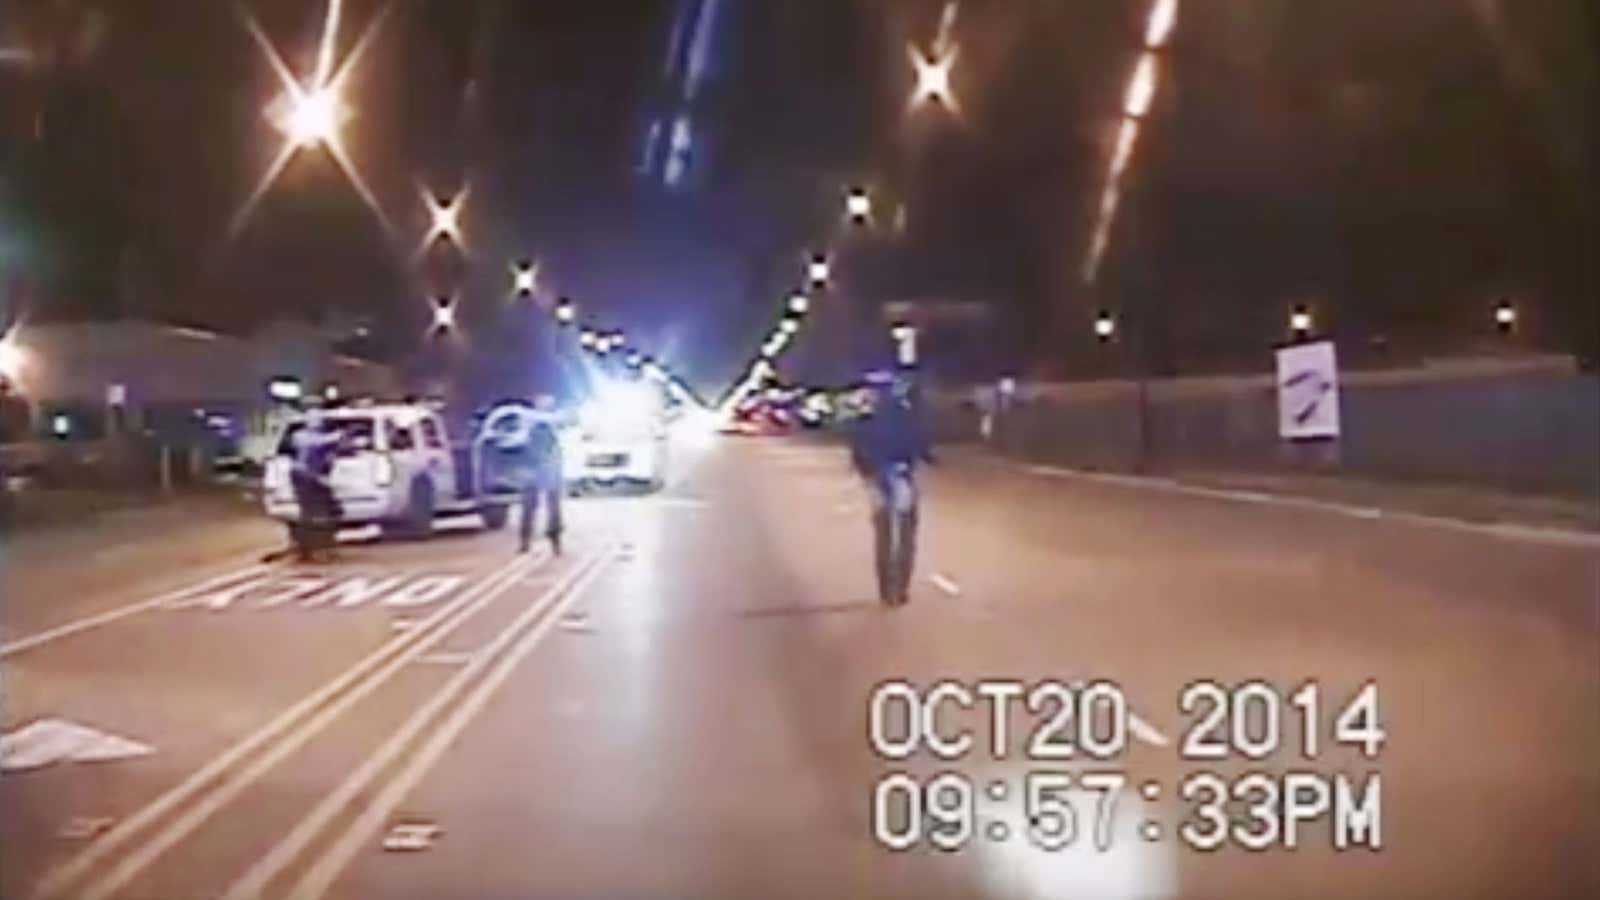 A police officer shot Laquan McDonald 16 times on Oct. 20, 2014.